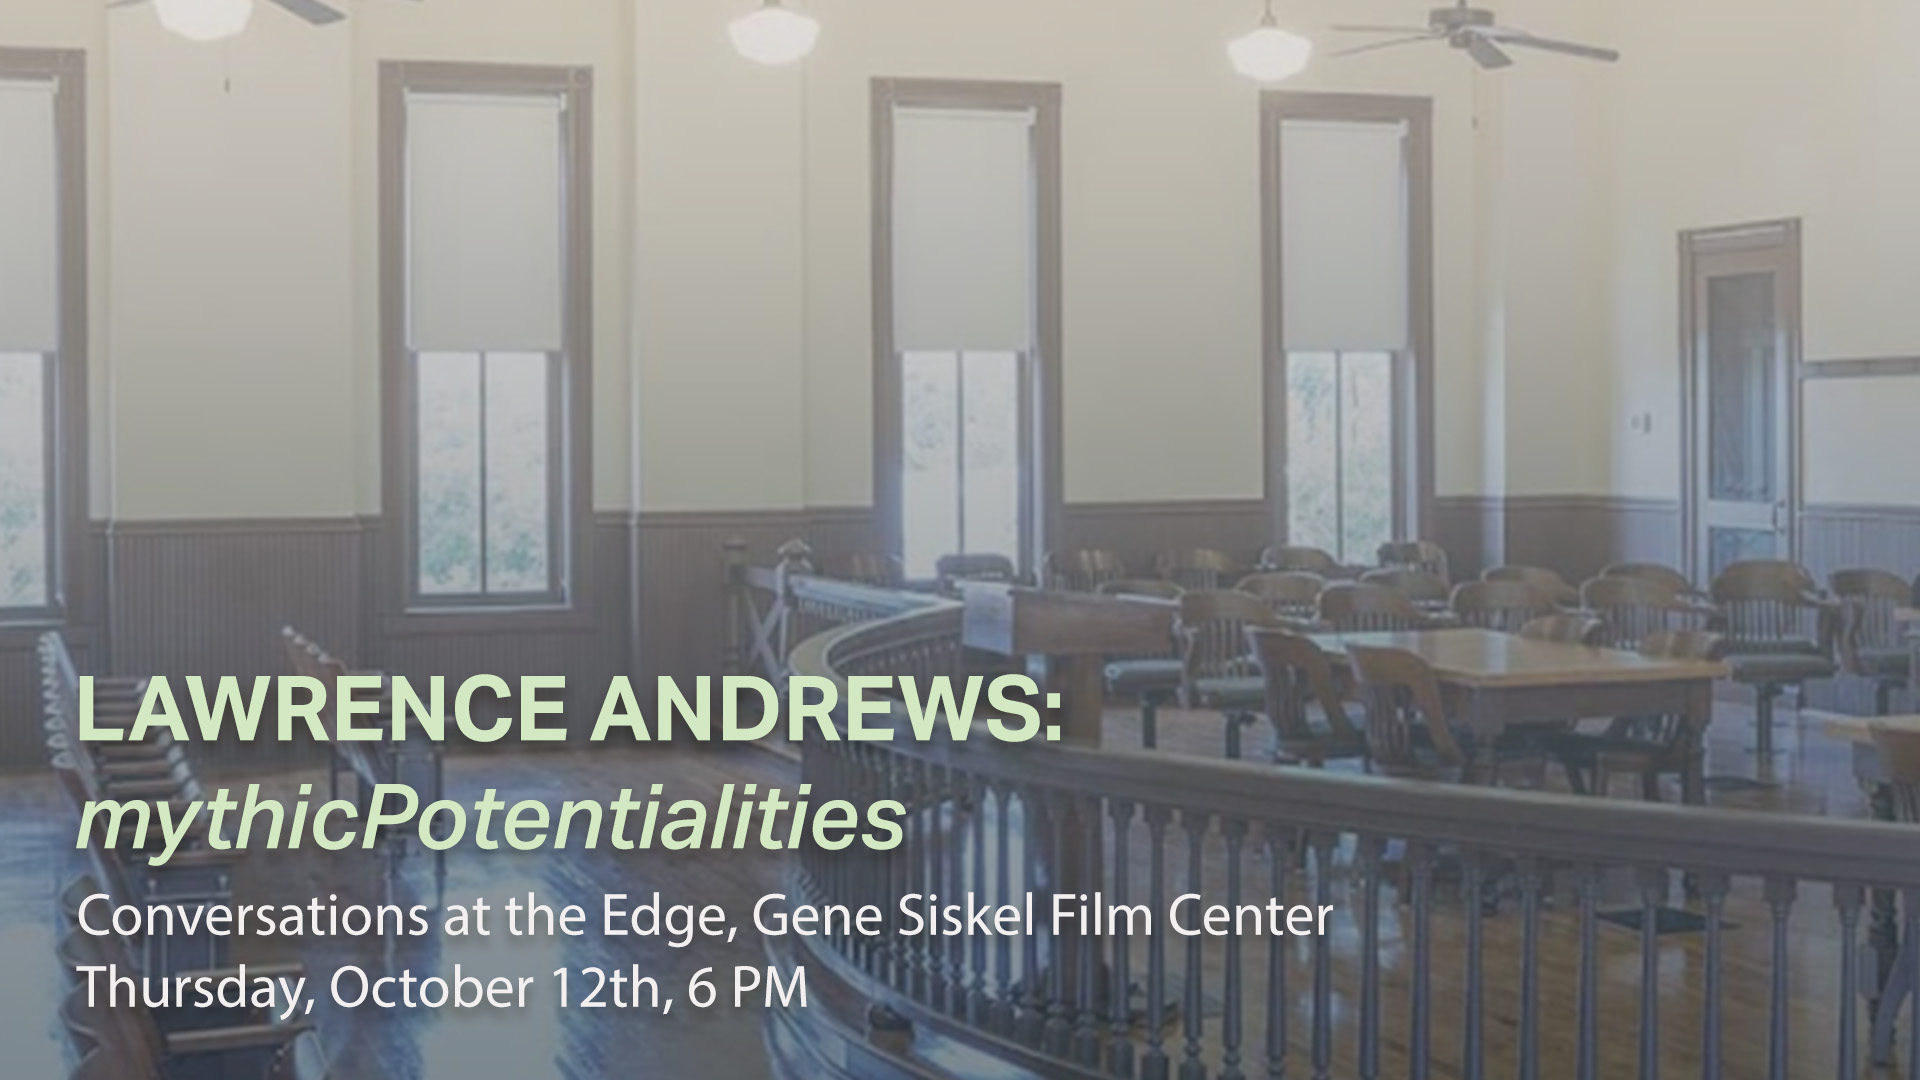 CATE: Lawrence Andrews: mythicPotentialities